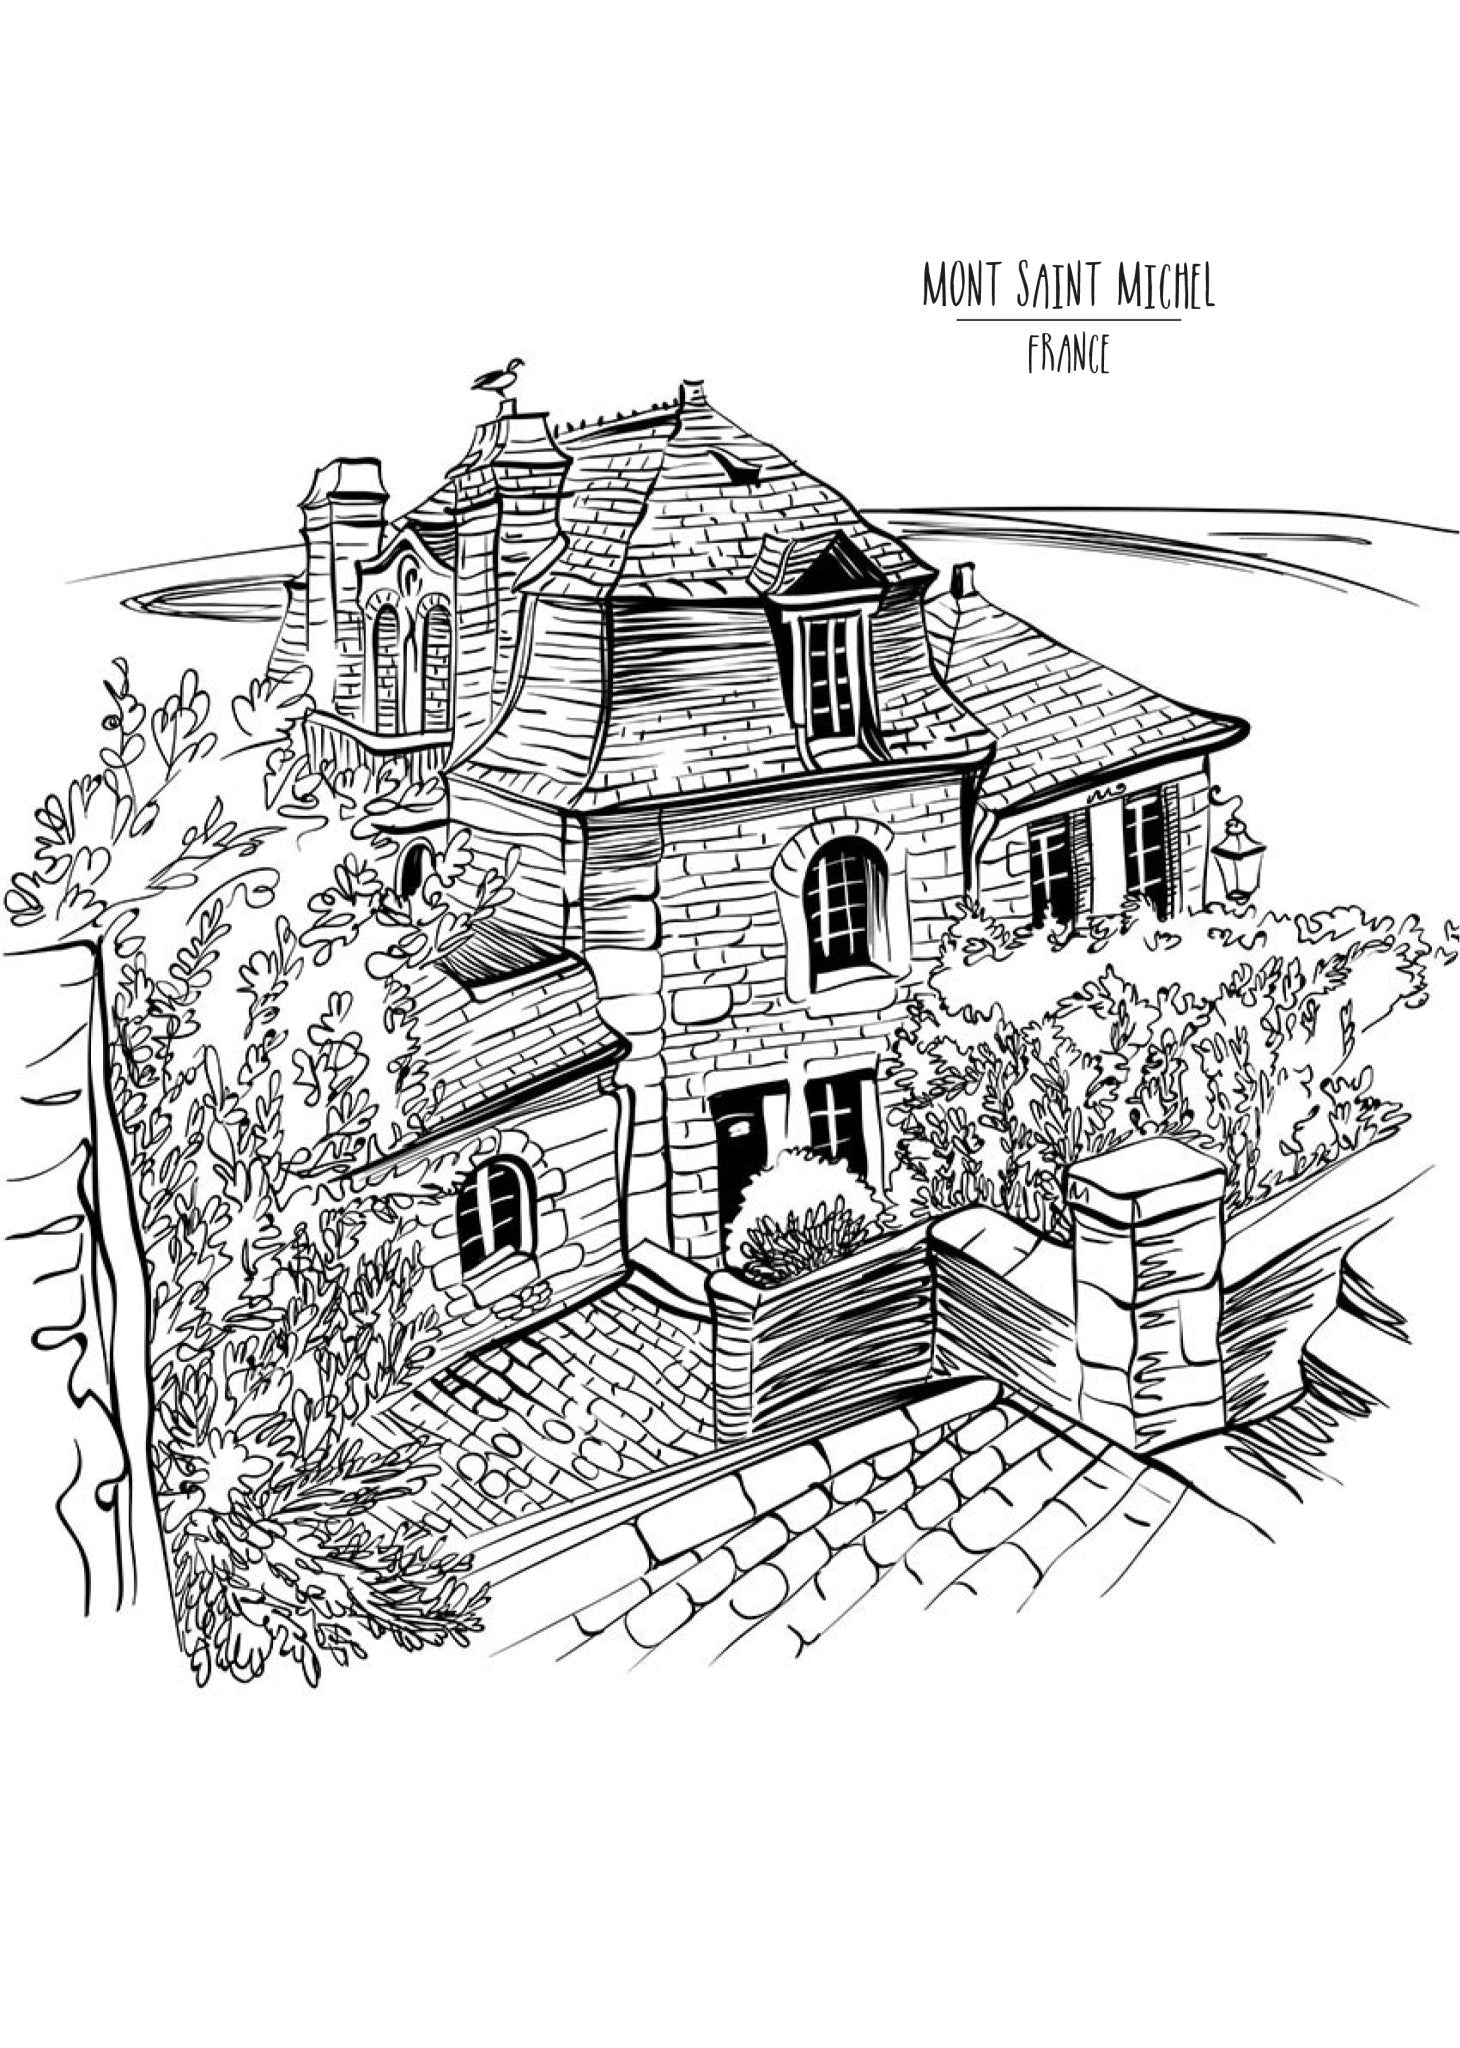 Cities Houses Castles Coloring Book 2 (Digital) - Monsoon Publishing USA